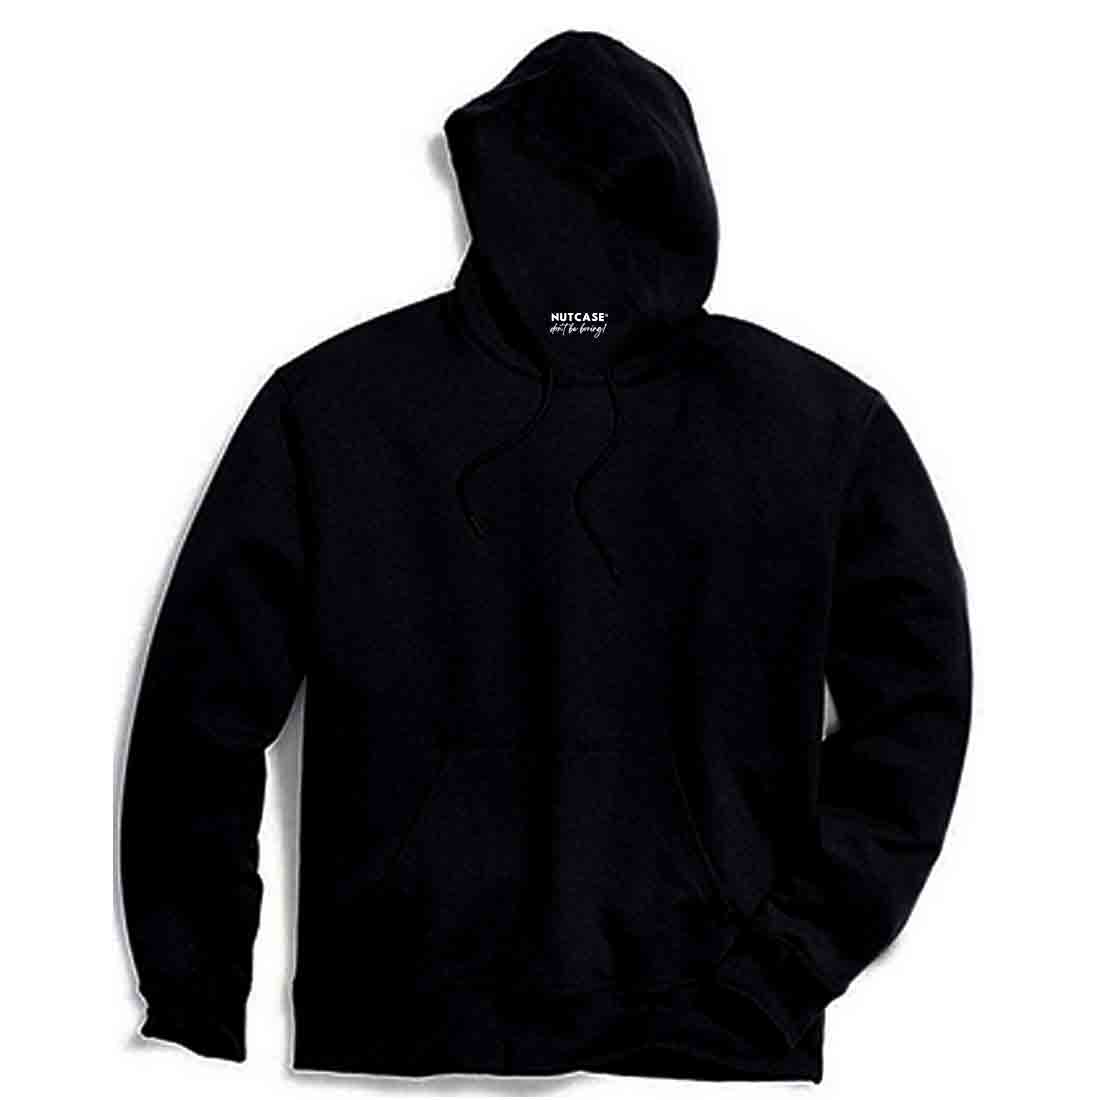 Nutcase Personalized Hoodies for Him - Add Name Box Style